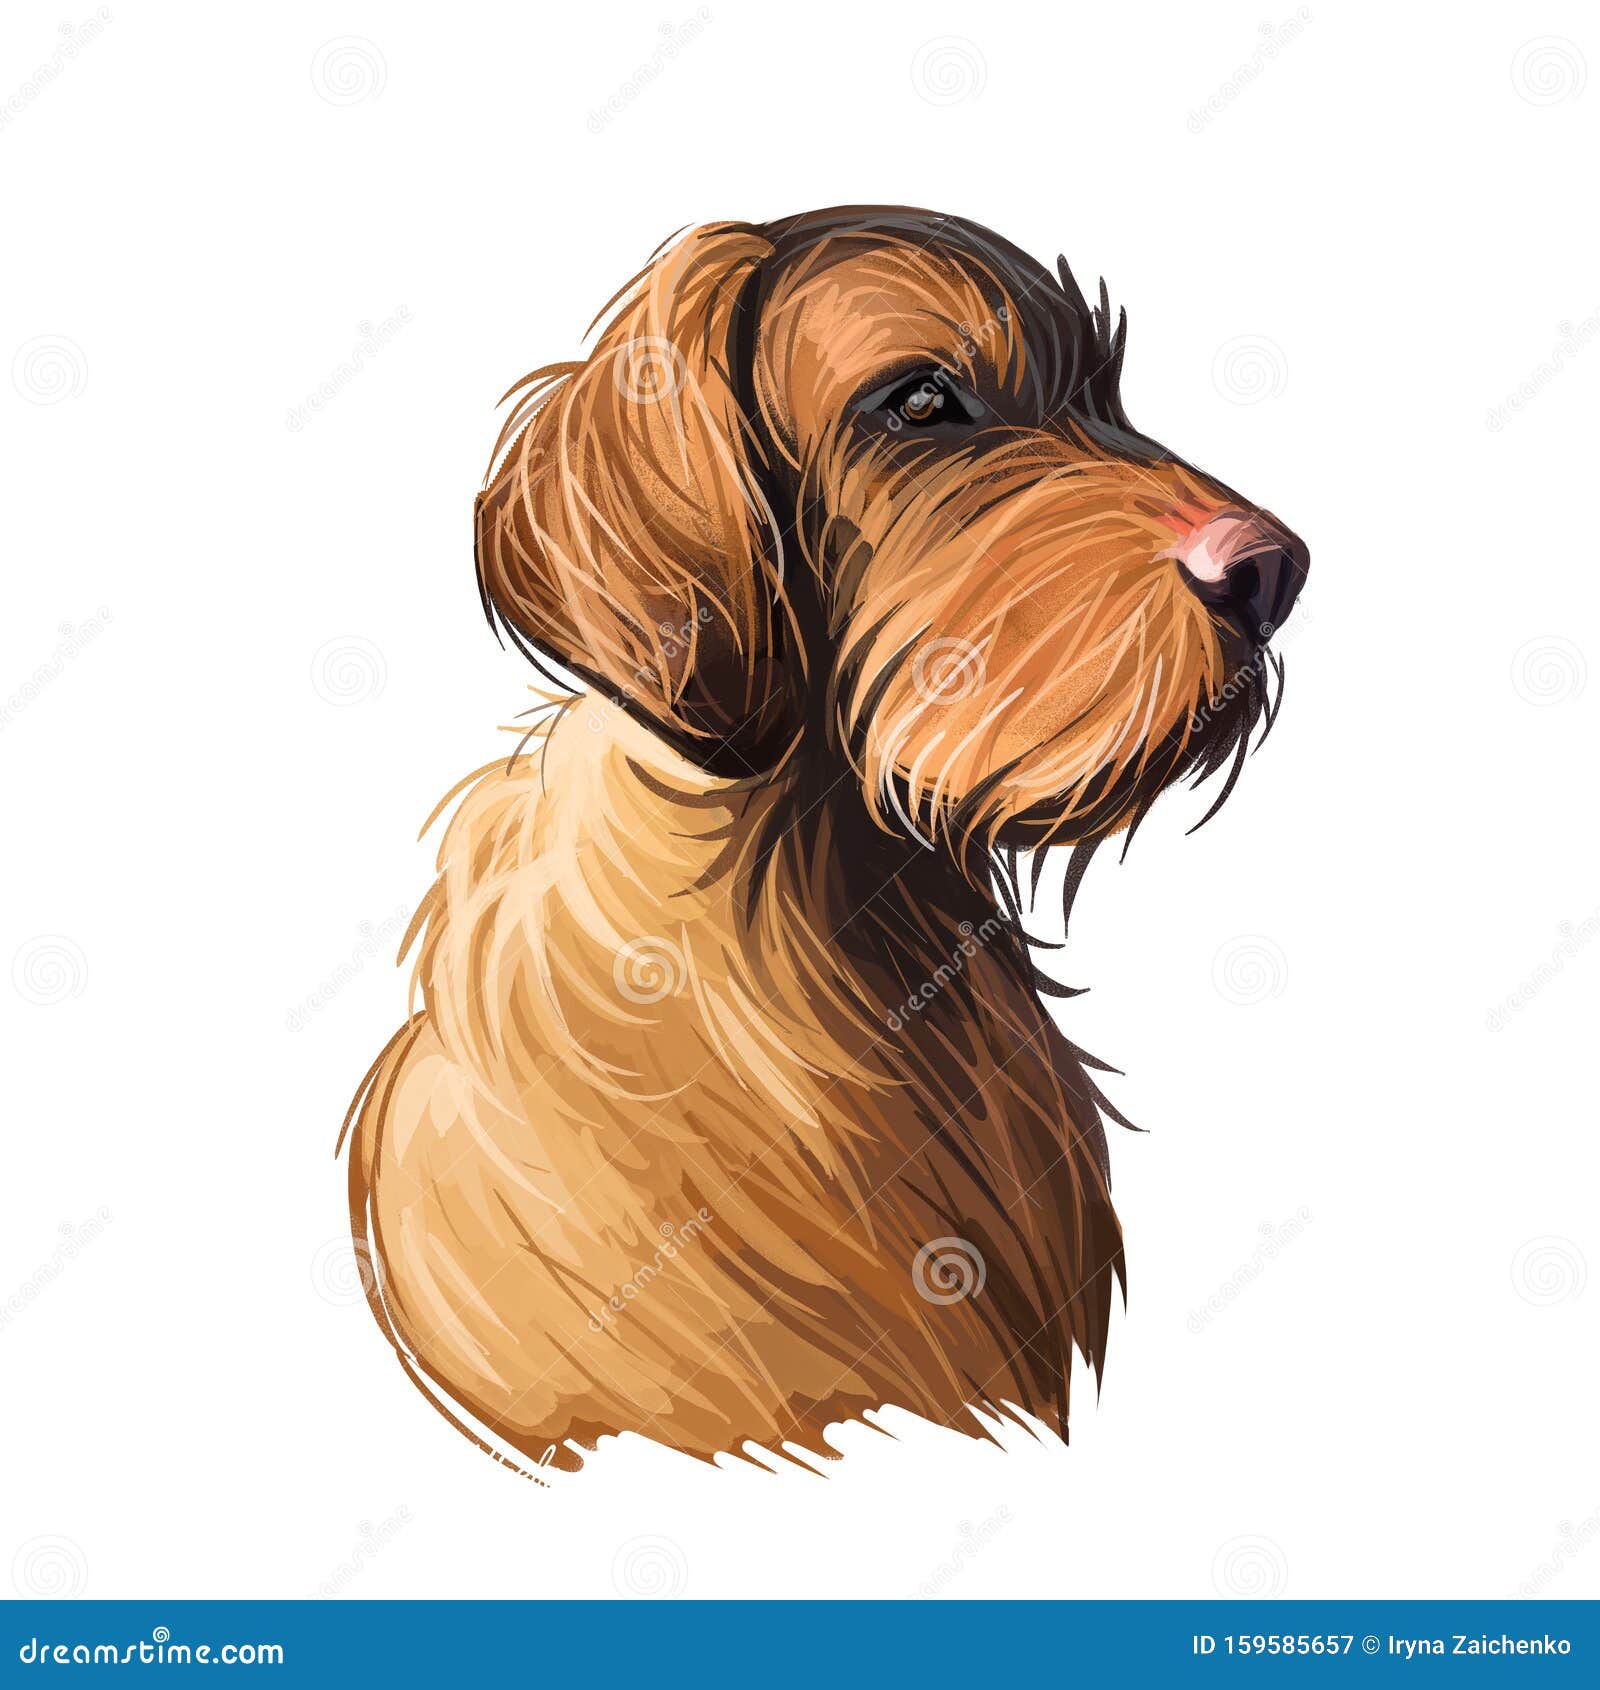 Wirehaired Vizsla Dog Breed Portrait Isolated On White Digital Art Illustration Animal Watercolor Drawing Of Hand Drawn Doggy Stock Illustration Illustration Of Digital Lovely 159585657